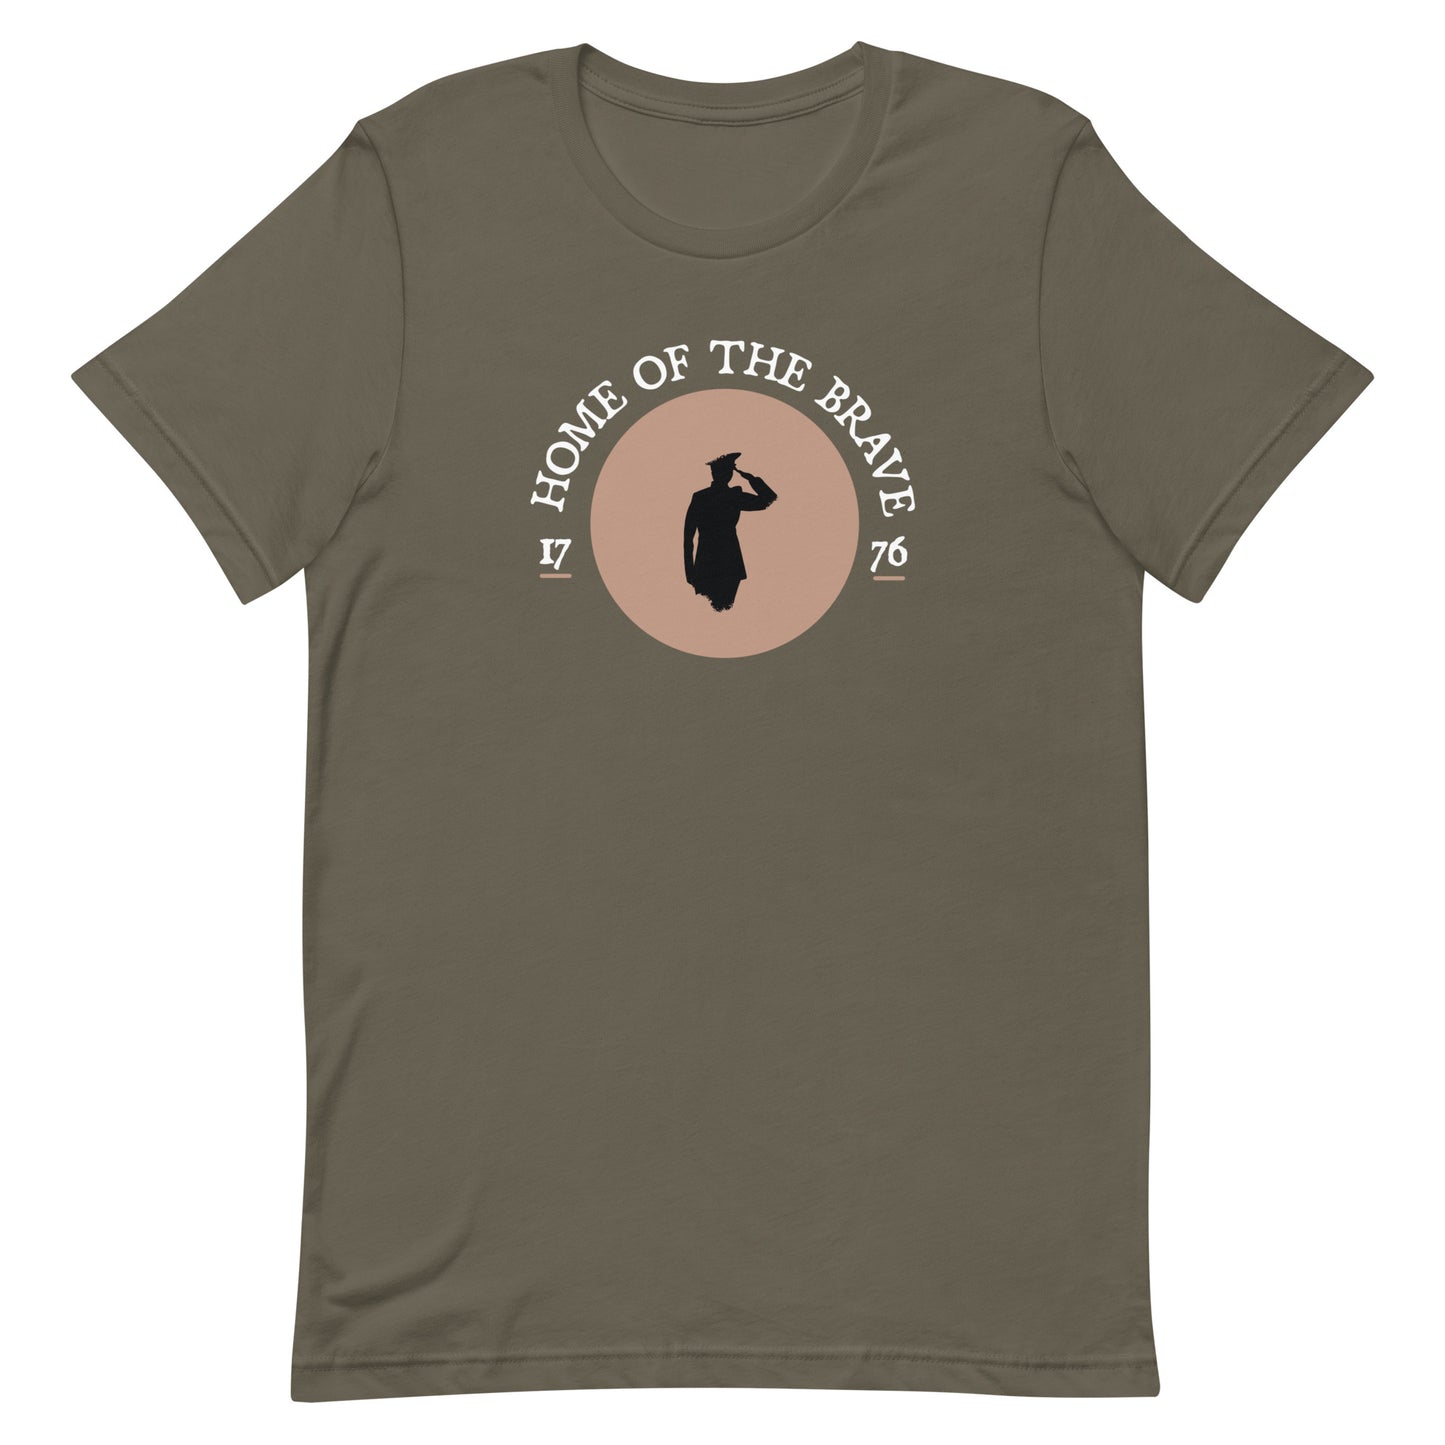 Home Of The Brave T-shirt